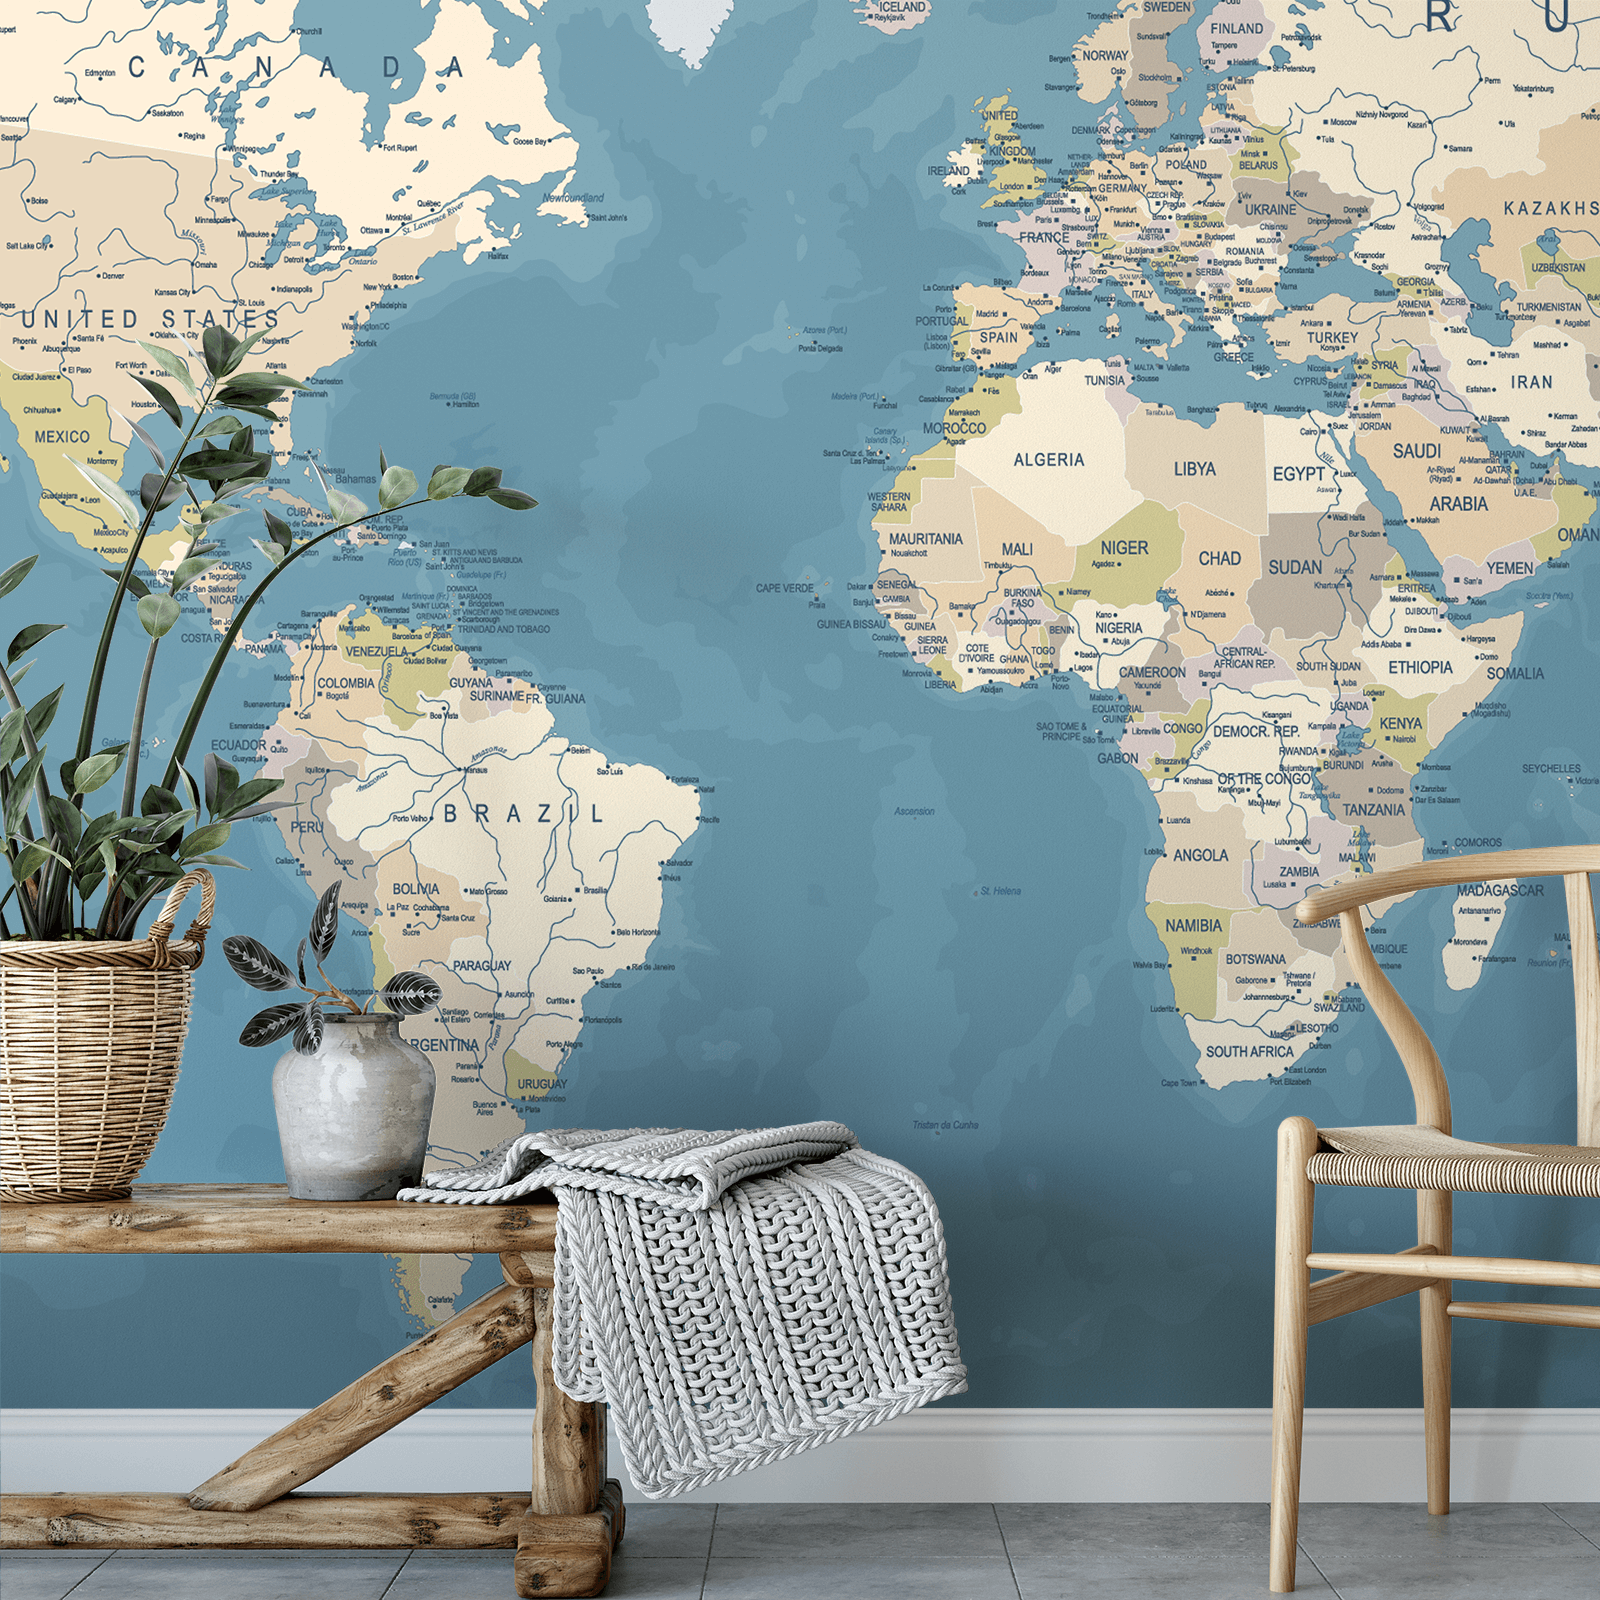 Vintage World Atlas Map Wall Mural Fabric Decal